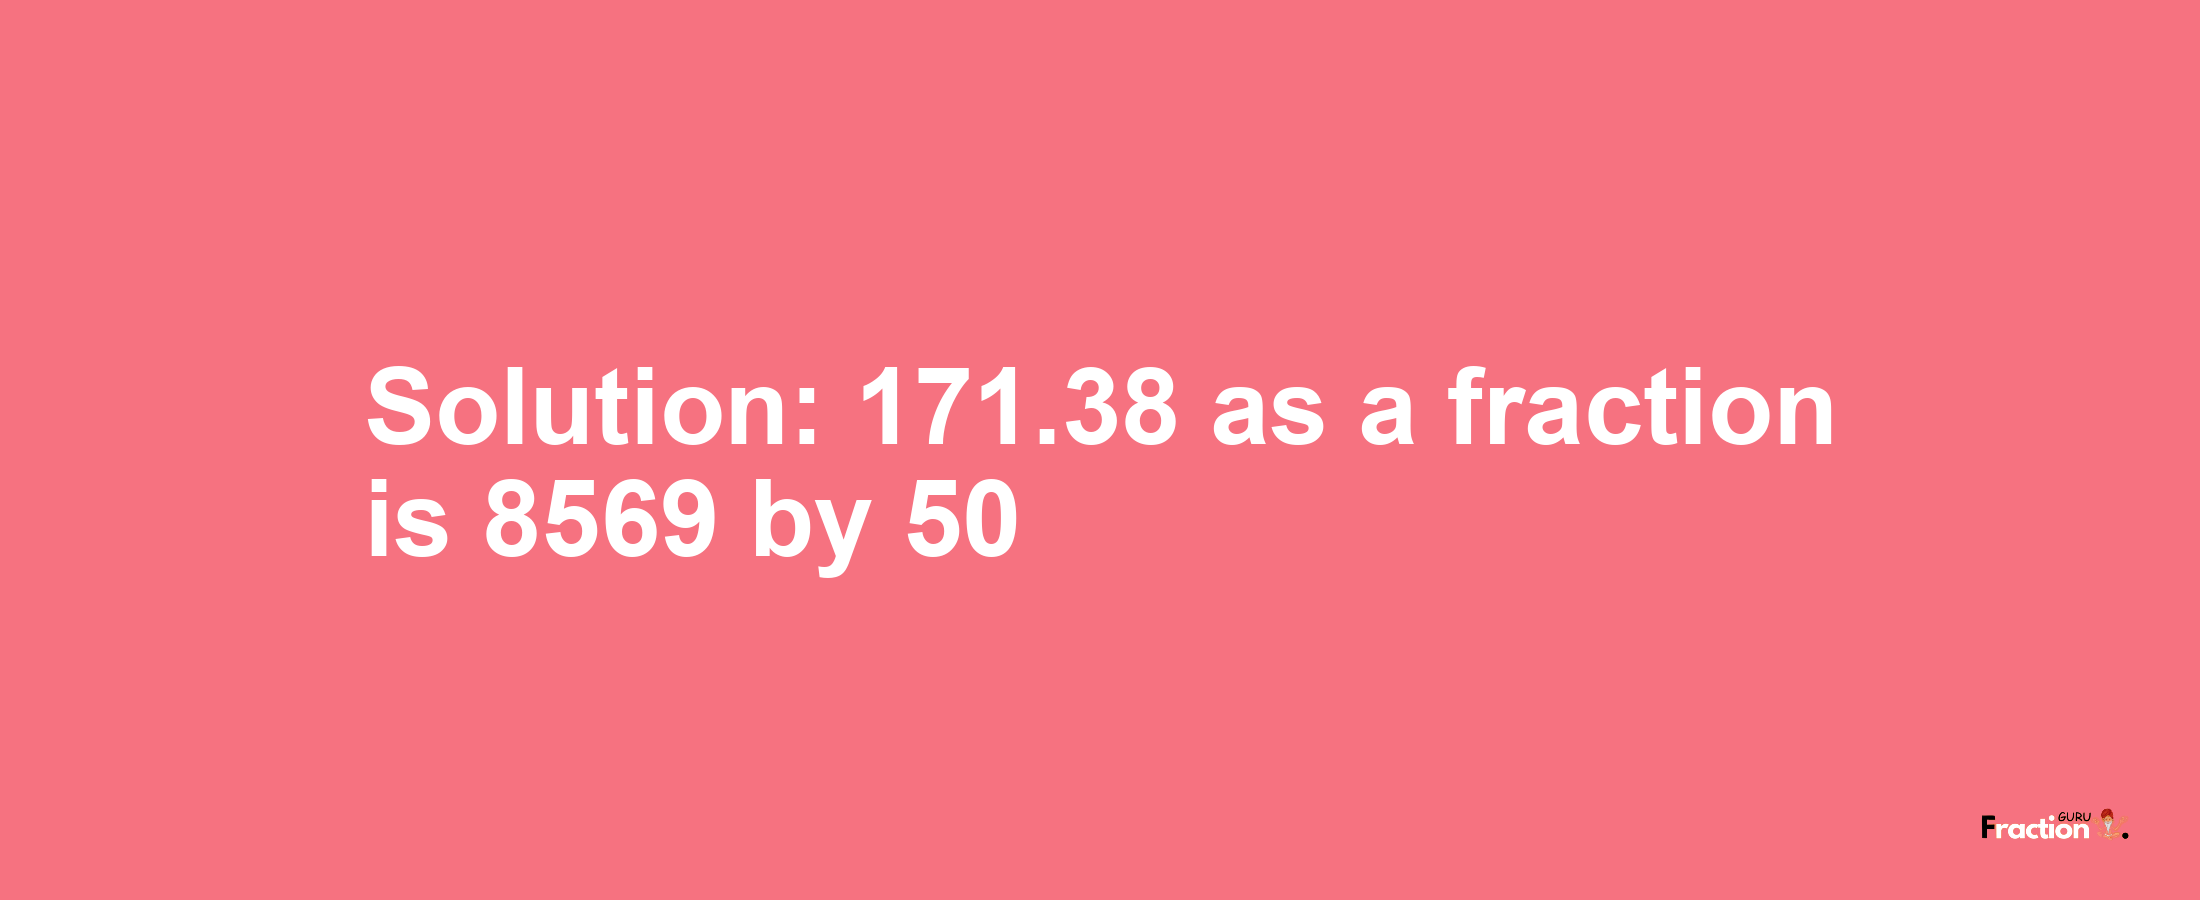 Solution:171.38 as a fraction is 8569/50